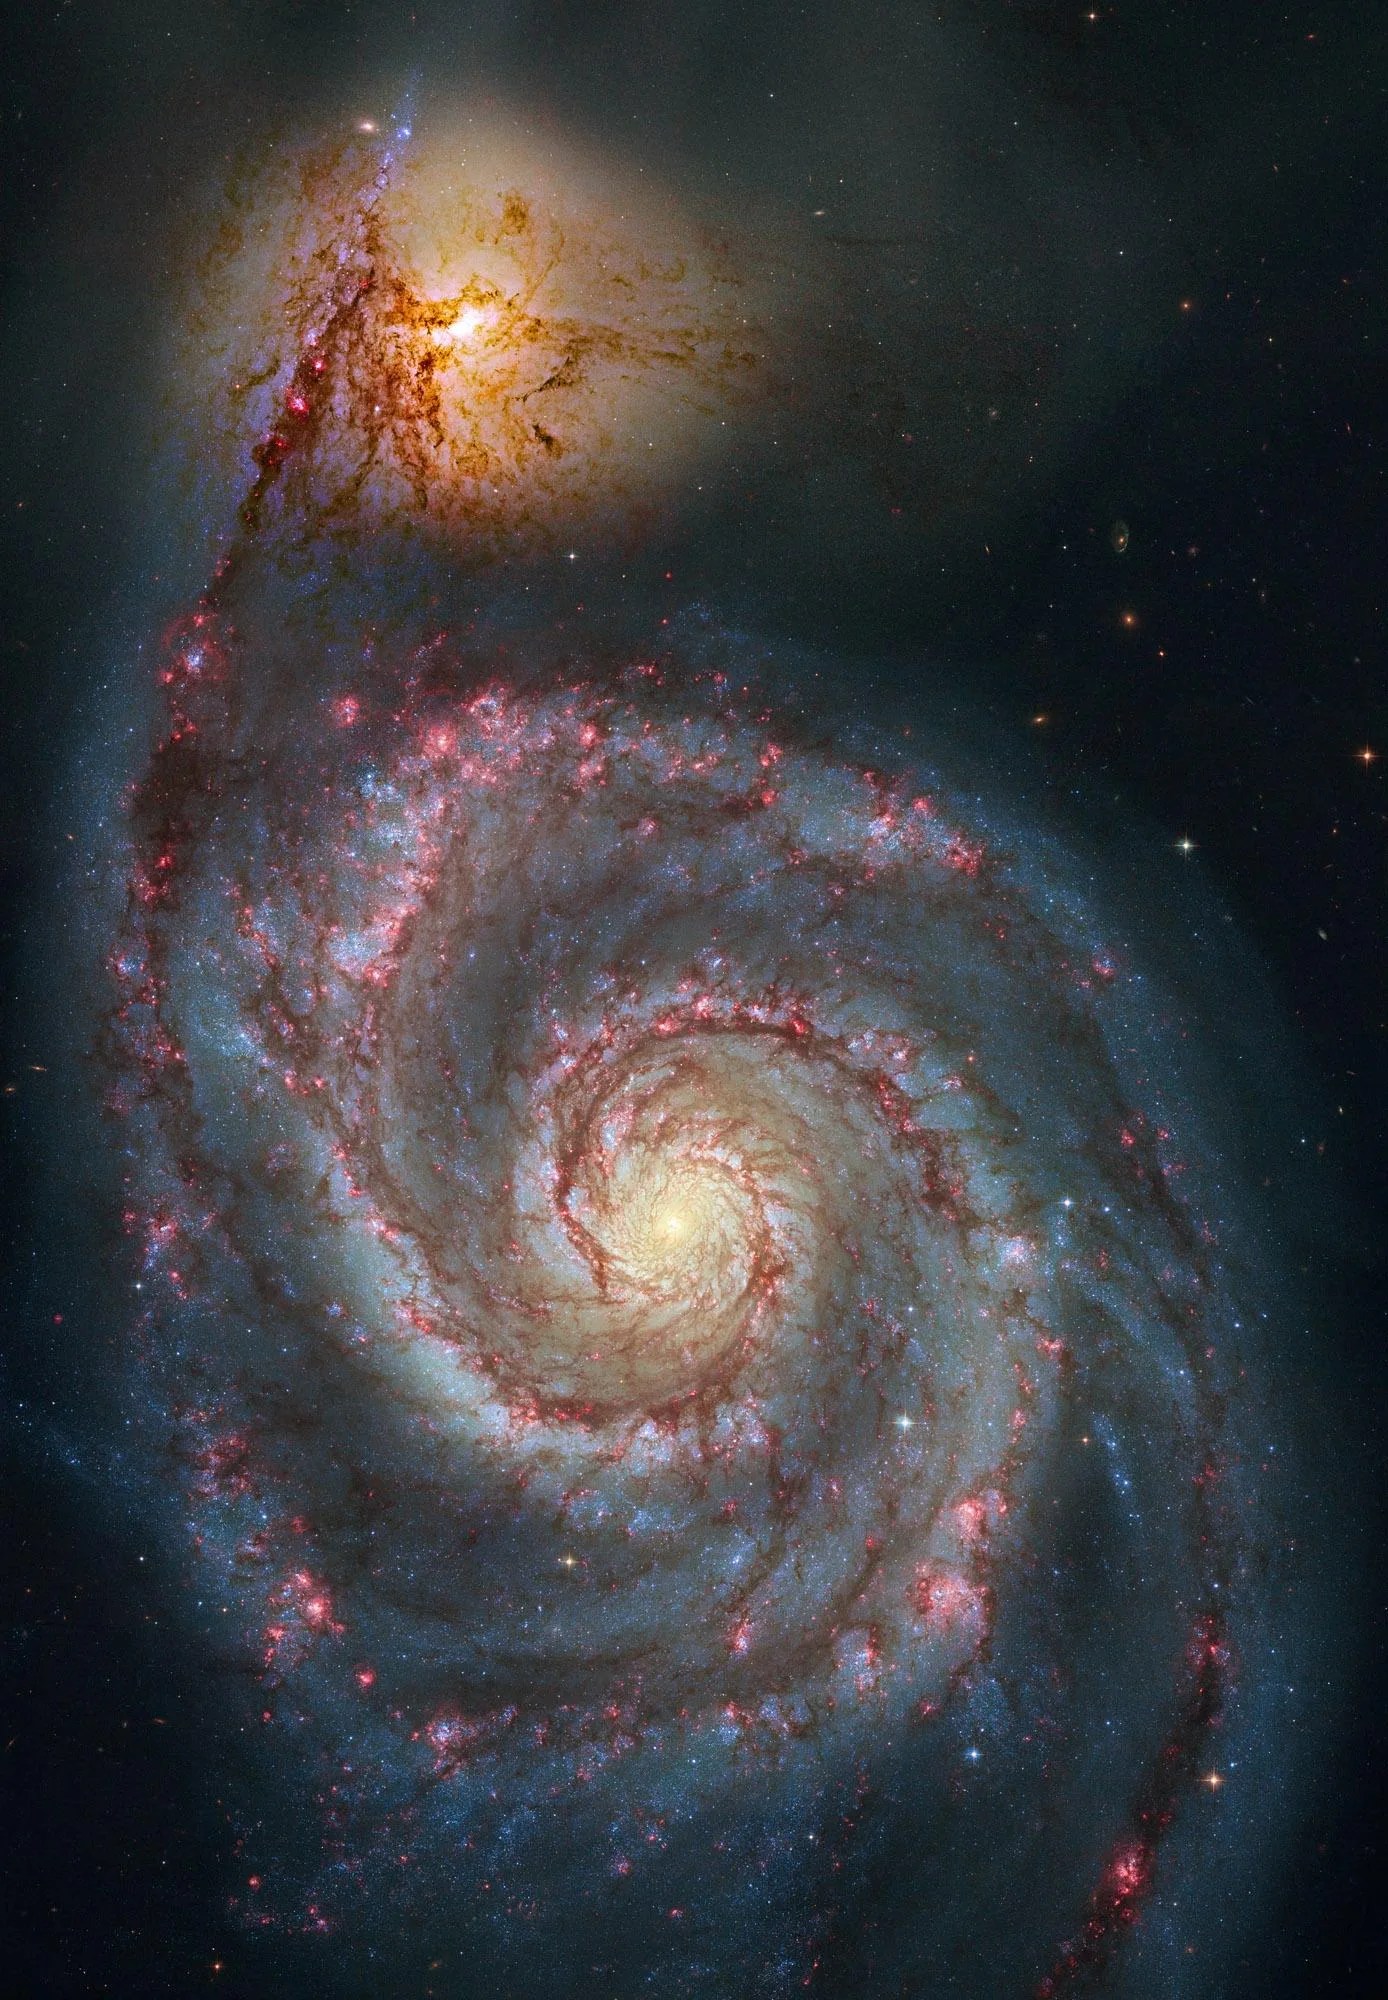 A large, face-on spiral galaxy fills the image. It's bright core is surrounded by pinkish-red dusty spiral arms.